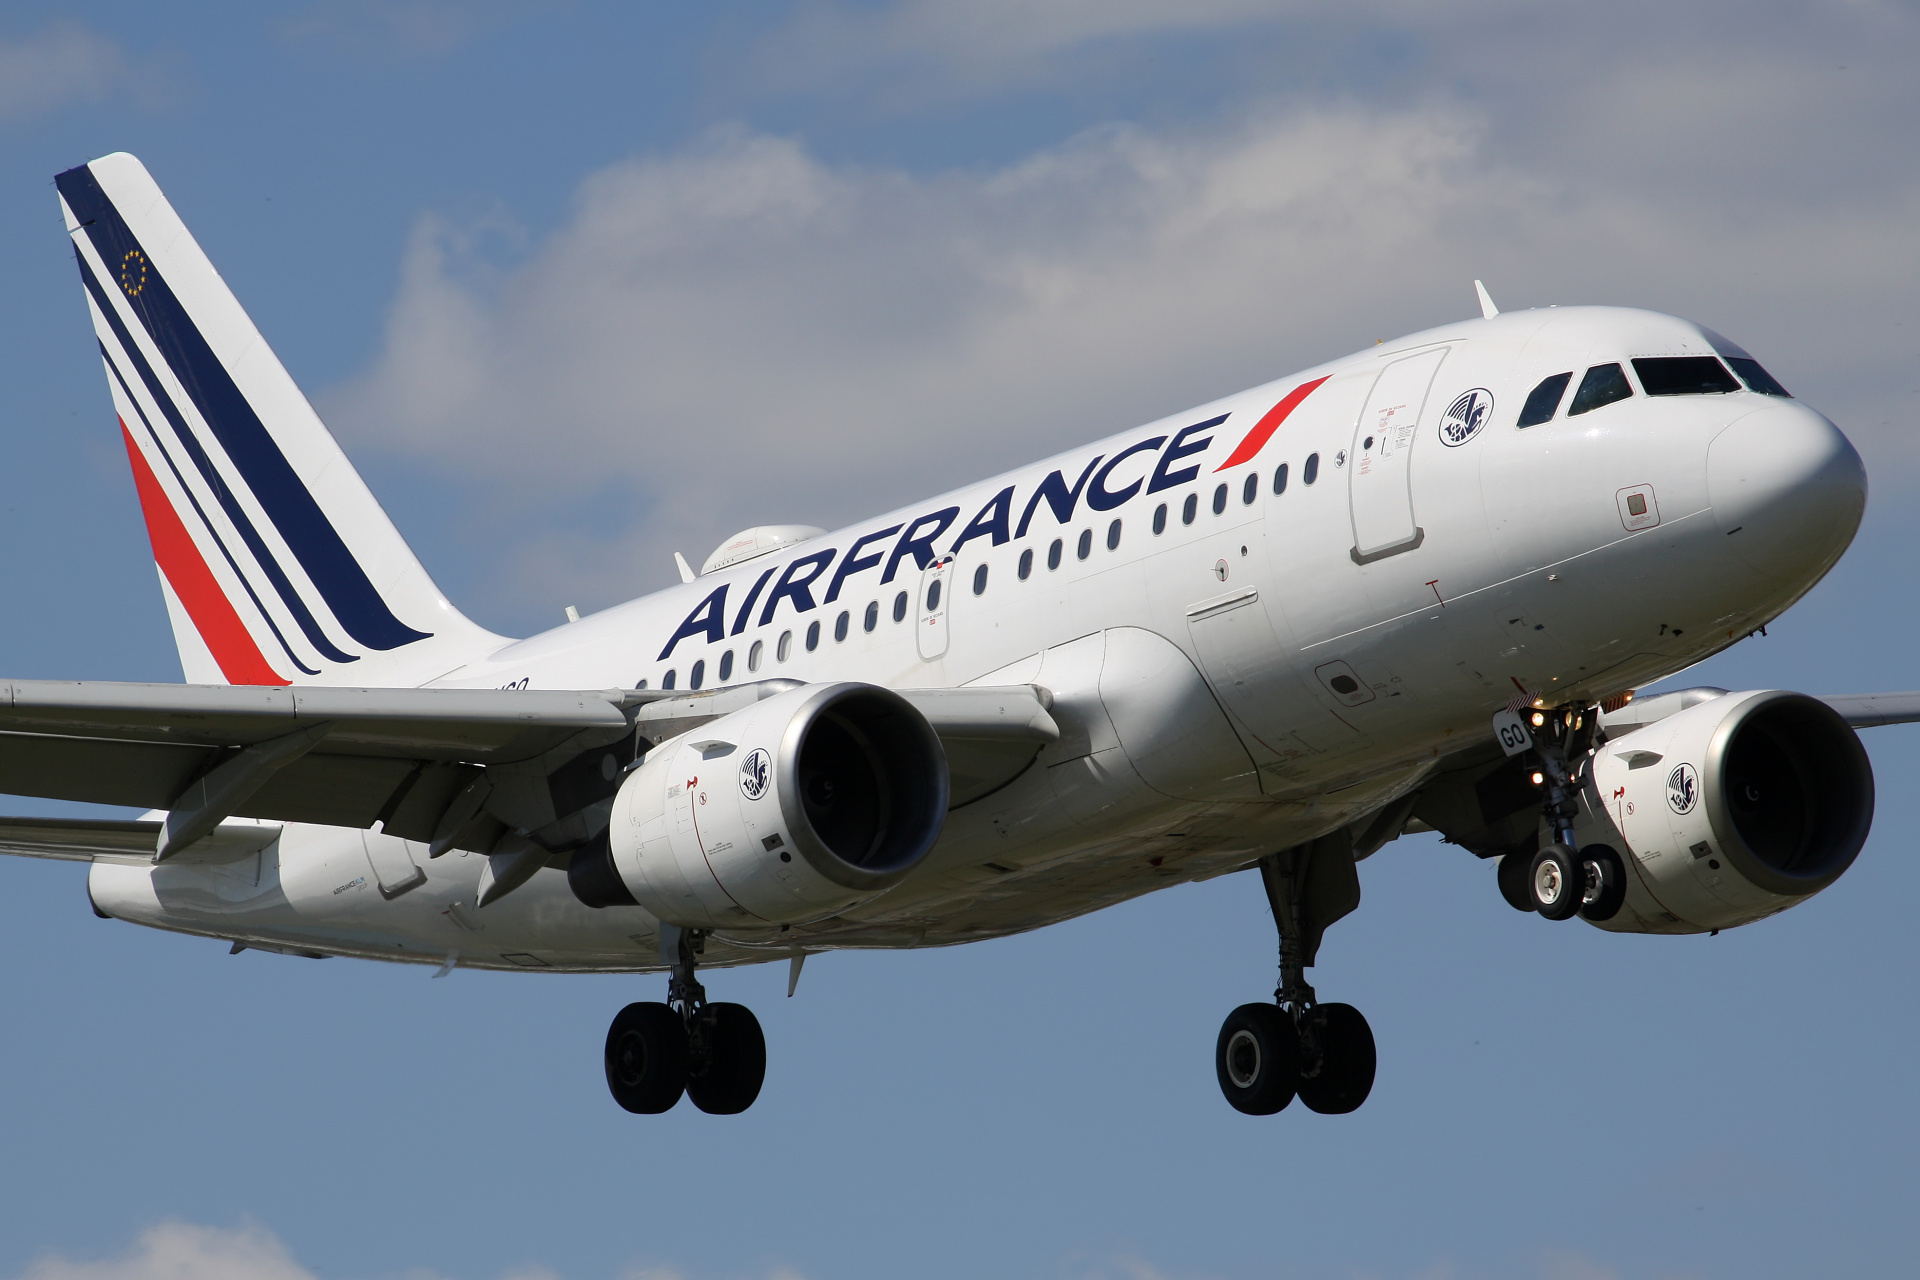 F-GUGO (new livery) (Aircraft » EPWA Spotting » Airbus A318-100 » Air France)